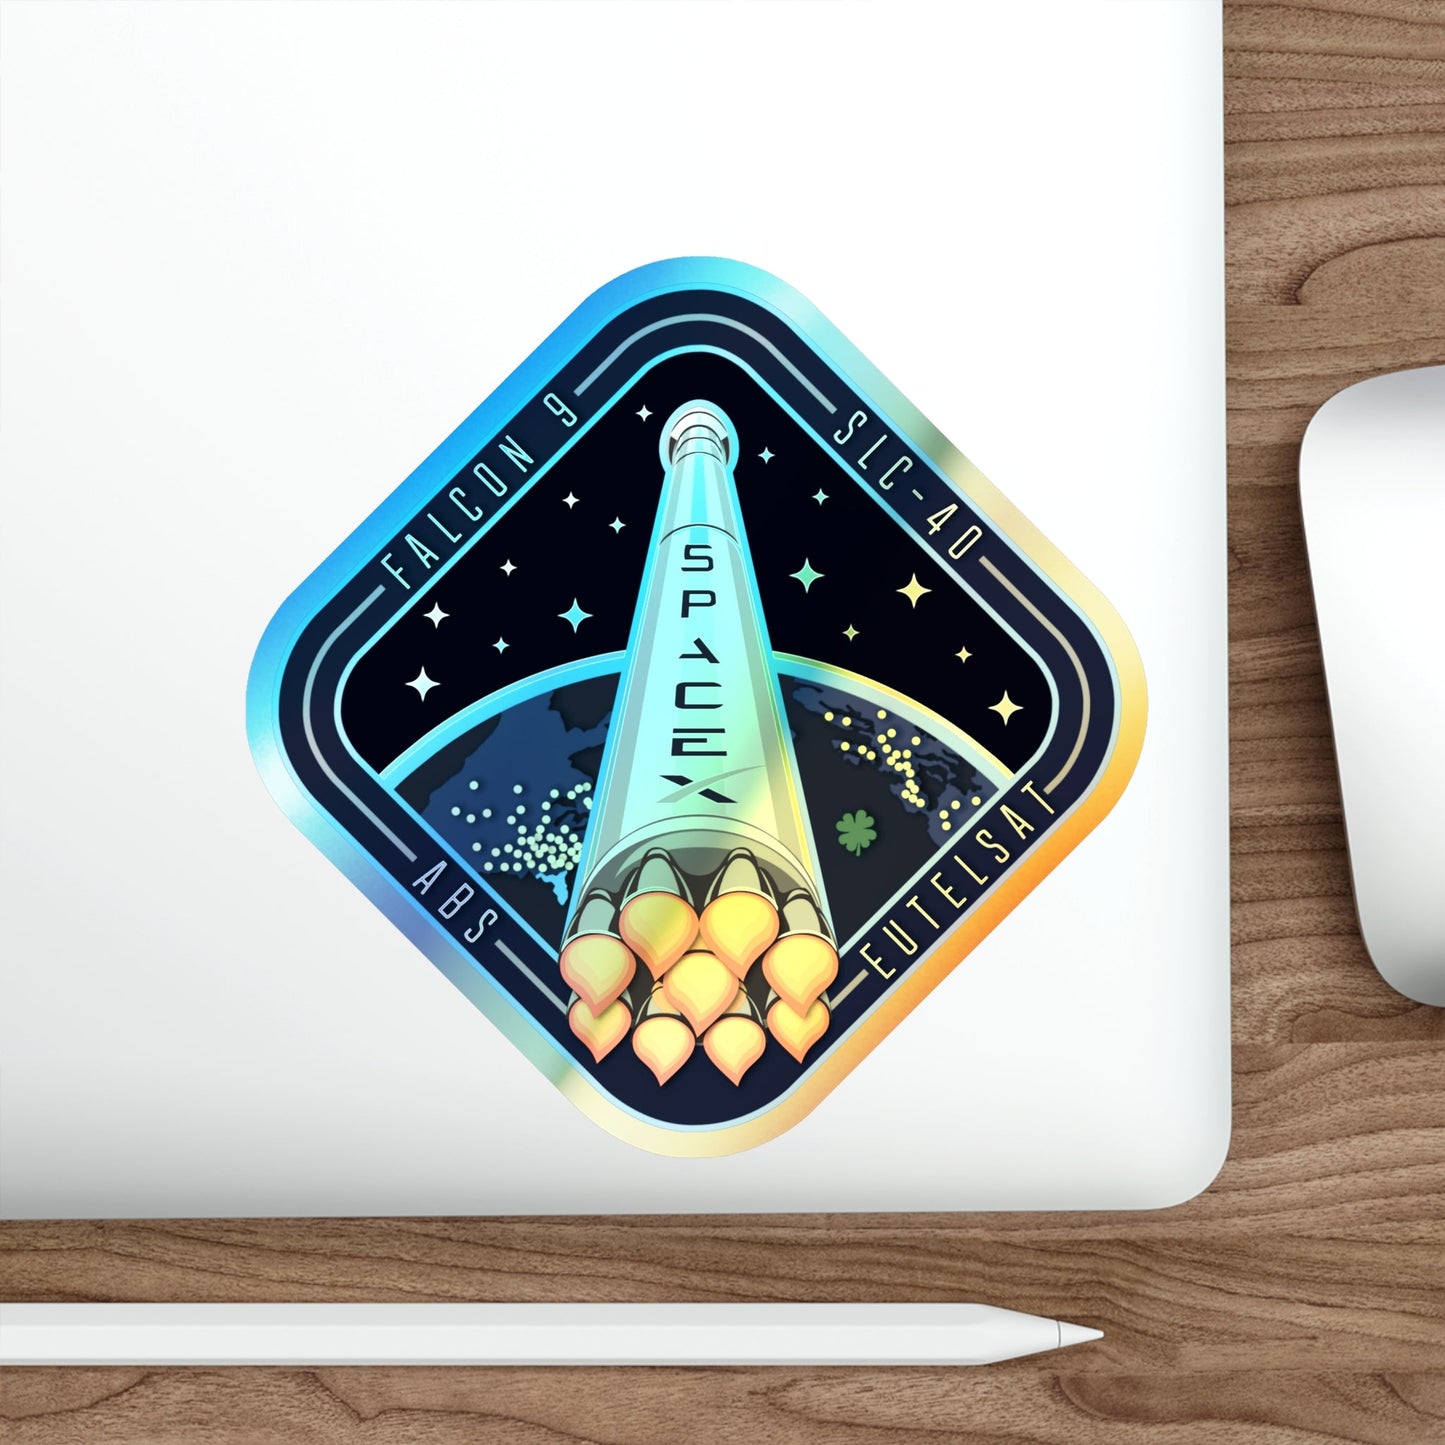 Cape Canaveral SpaceX Eutelsat 115 West B Falcon 9 Mission (SpaceX) Holographic STICKER Die-Cut Vinyl Decal-The Sticker Space